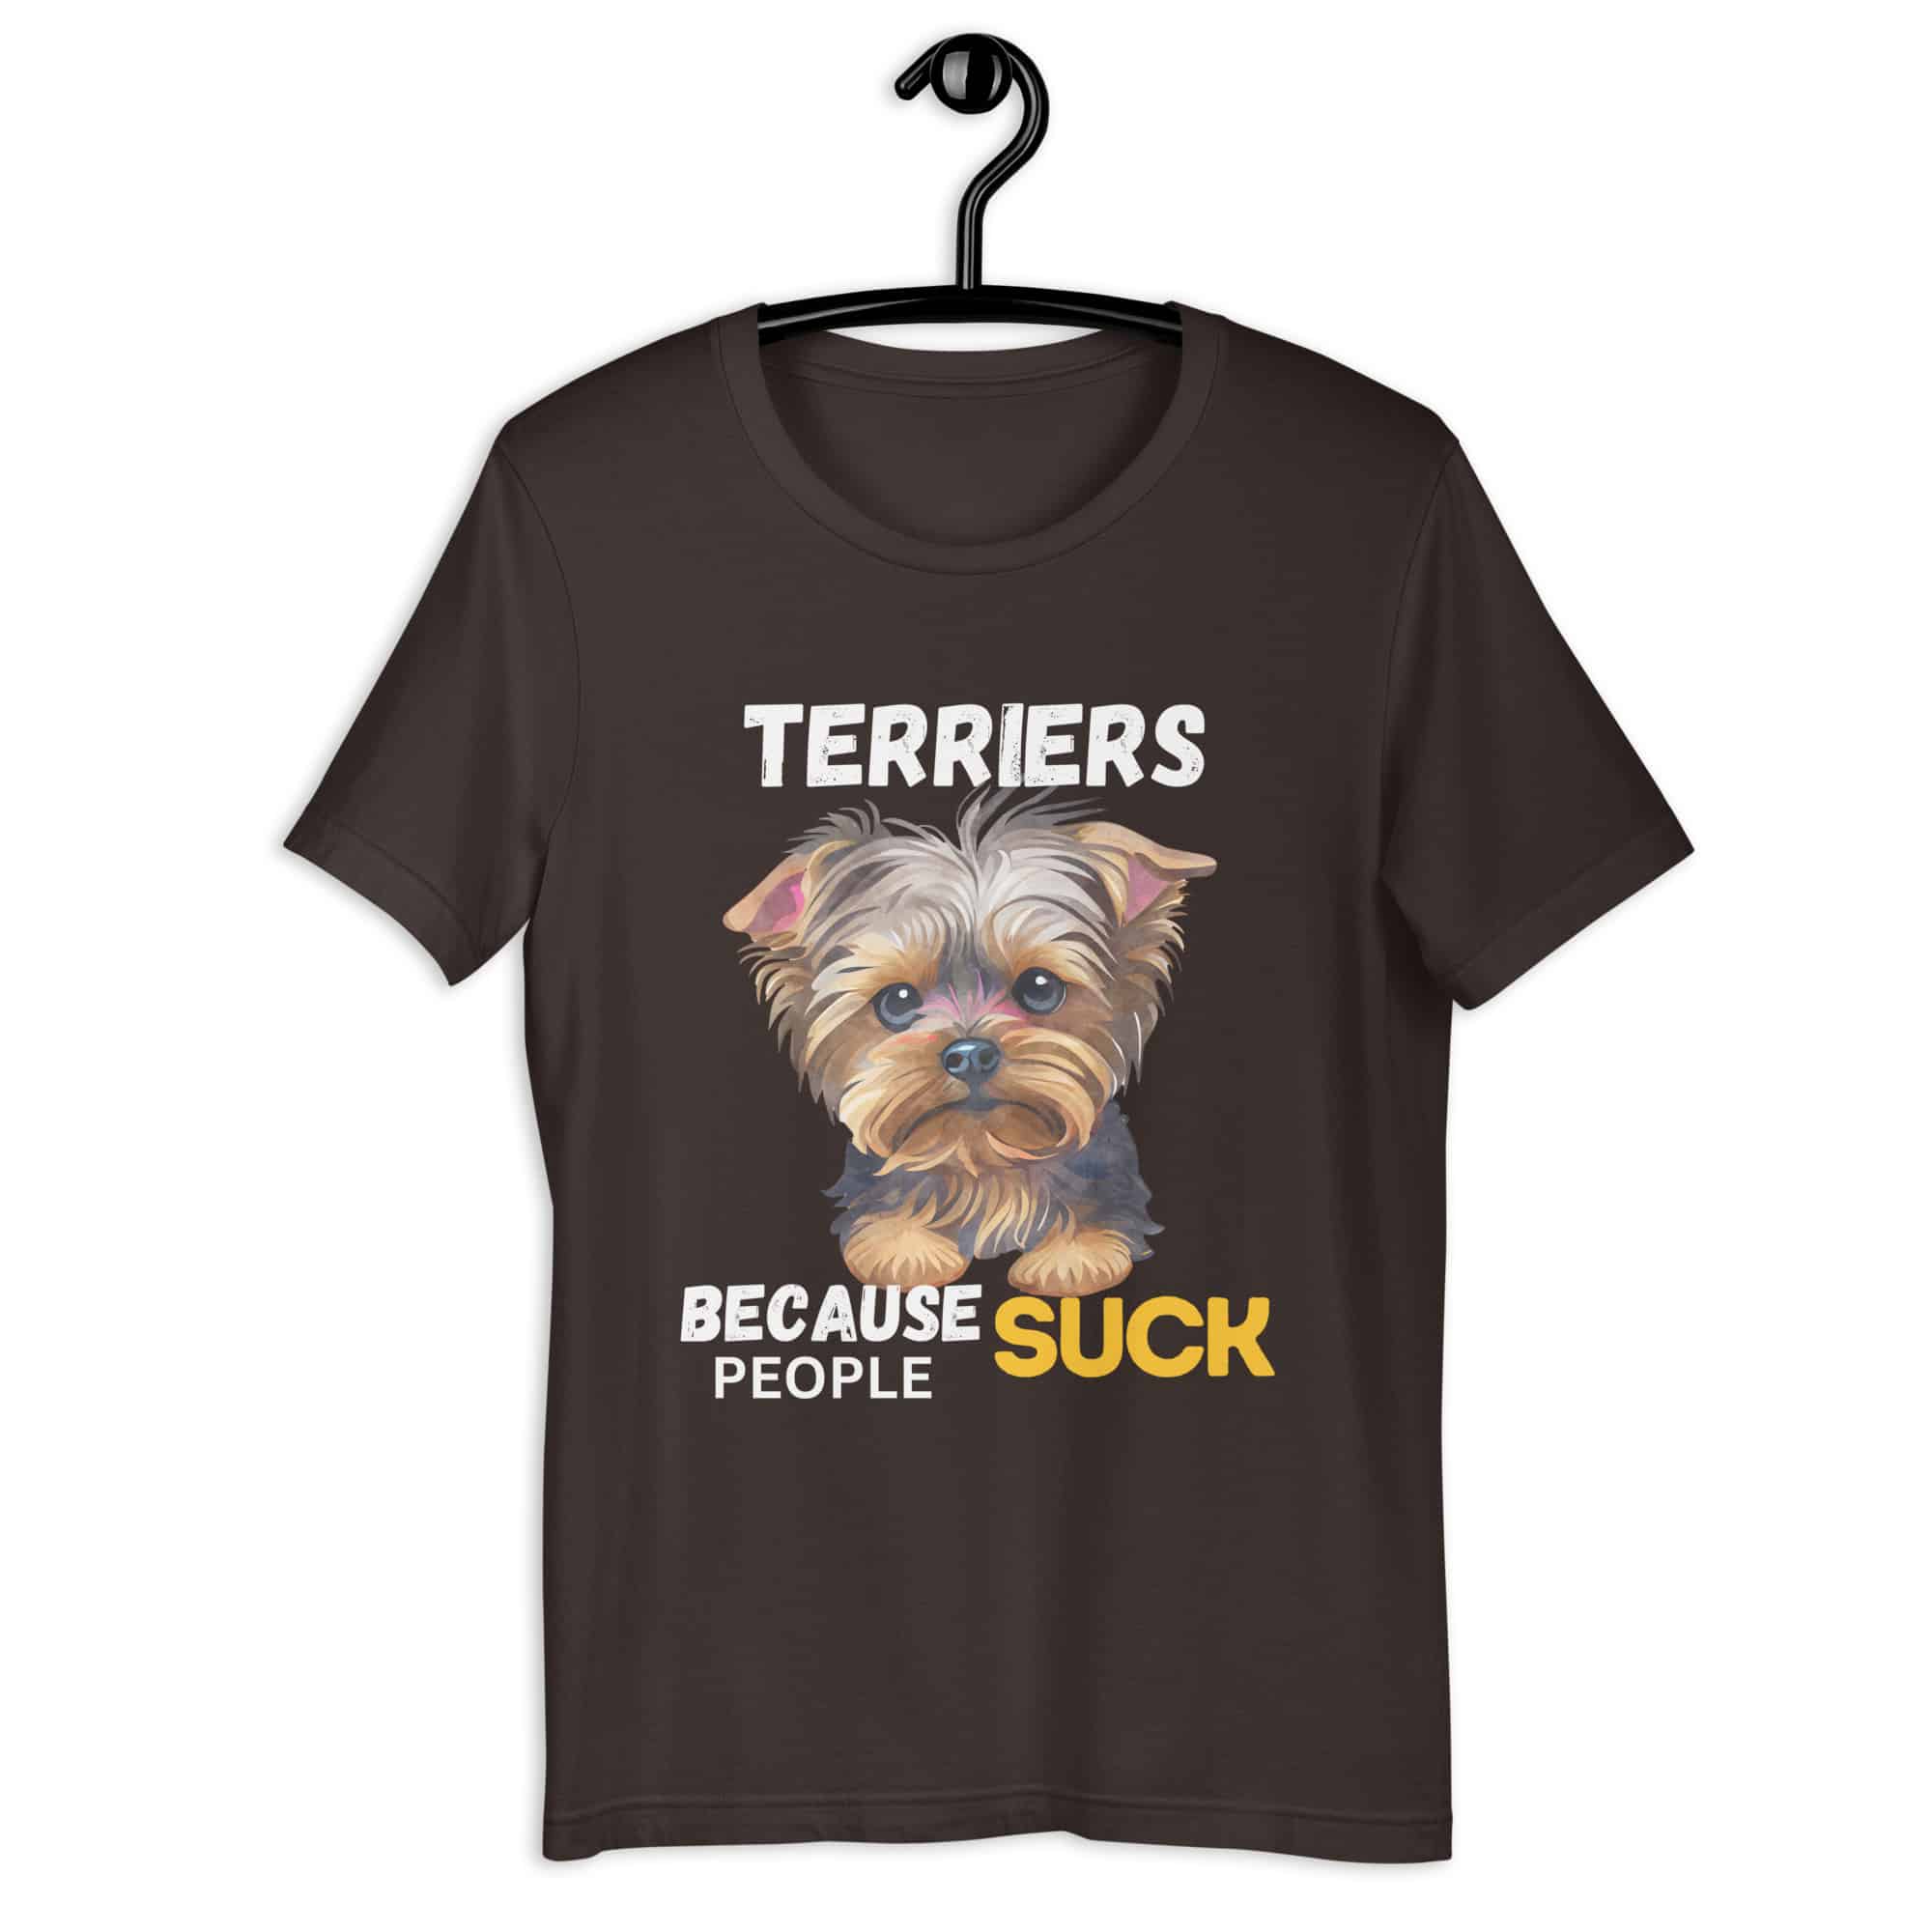 Terriers Because People Suck Unisex T-Shirt brown